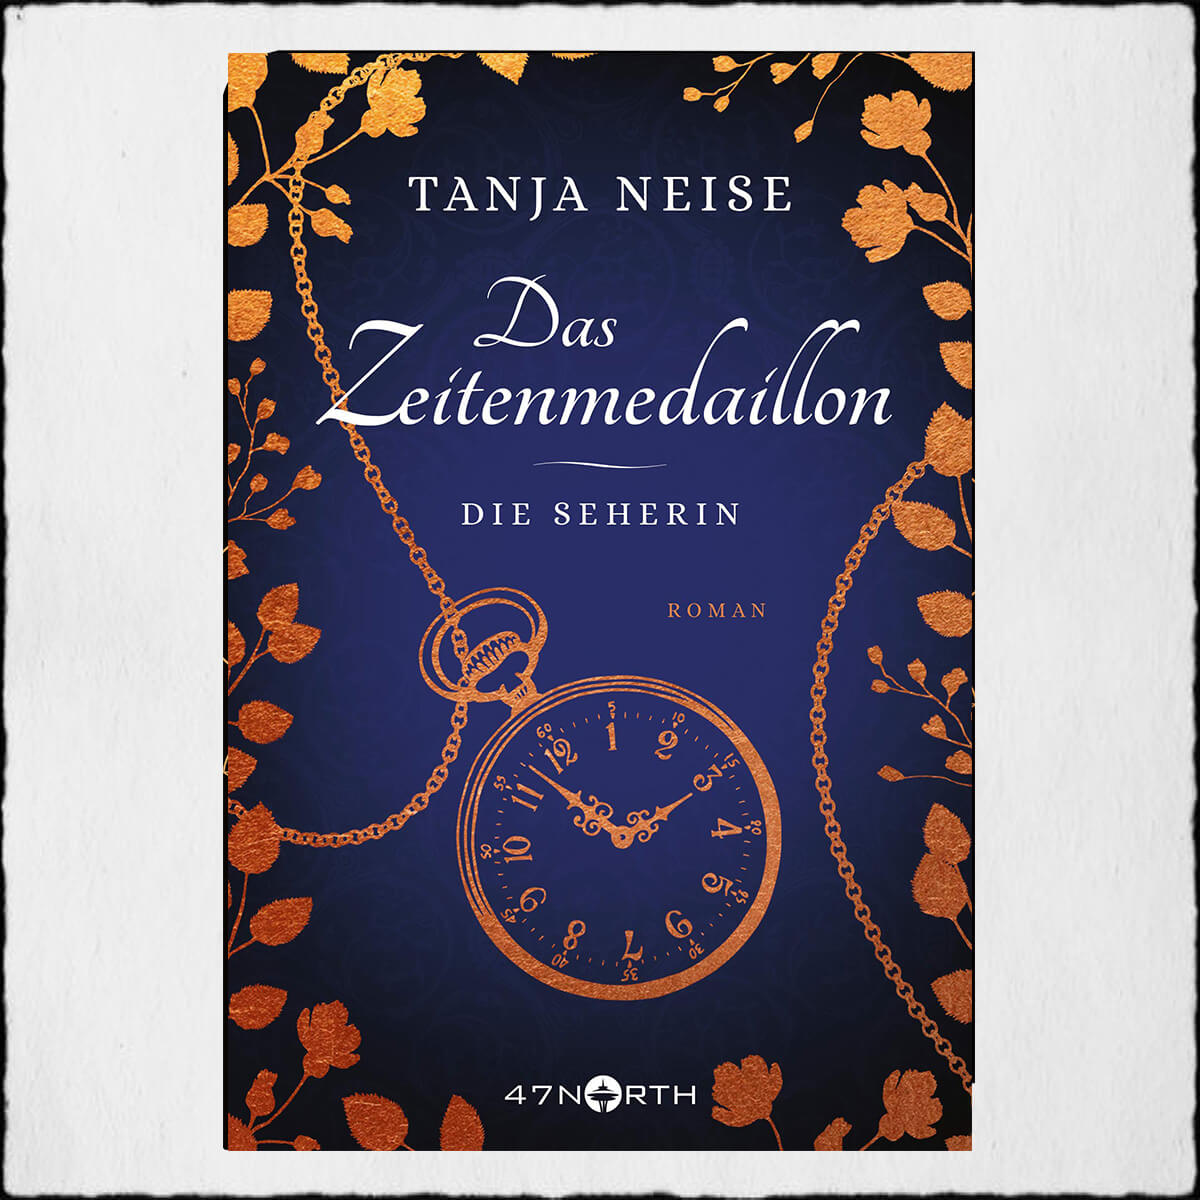 Cover: Tanja Neise "Das Zeitenmedaillon - Die Seherin © 2019 Tanja Neise 47North by Amazon